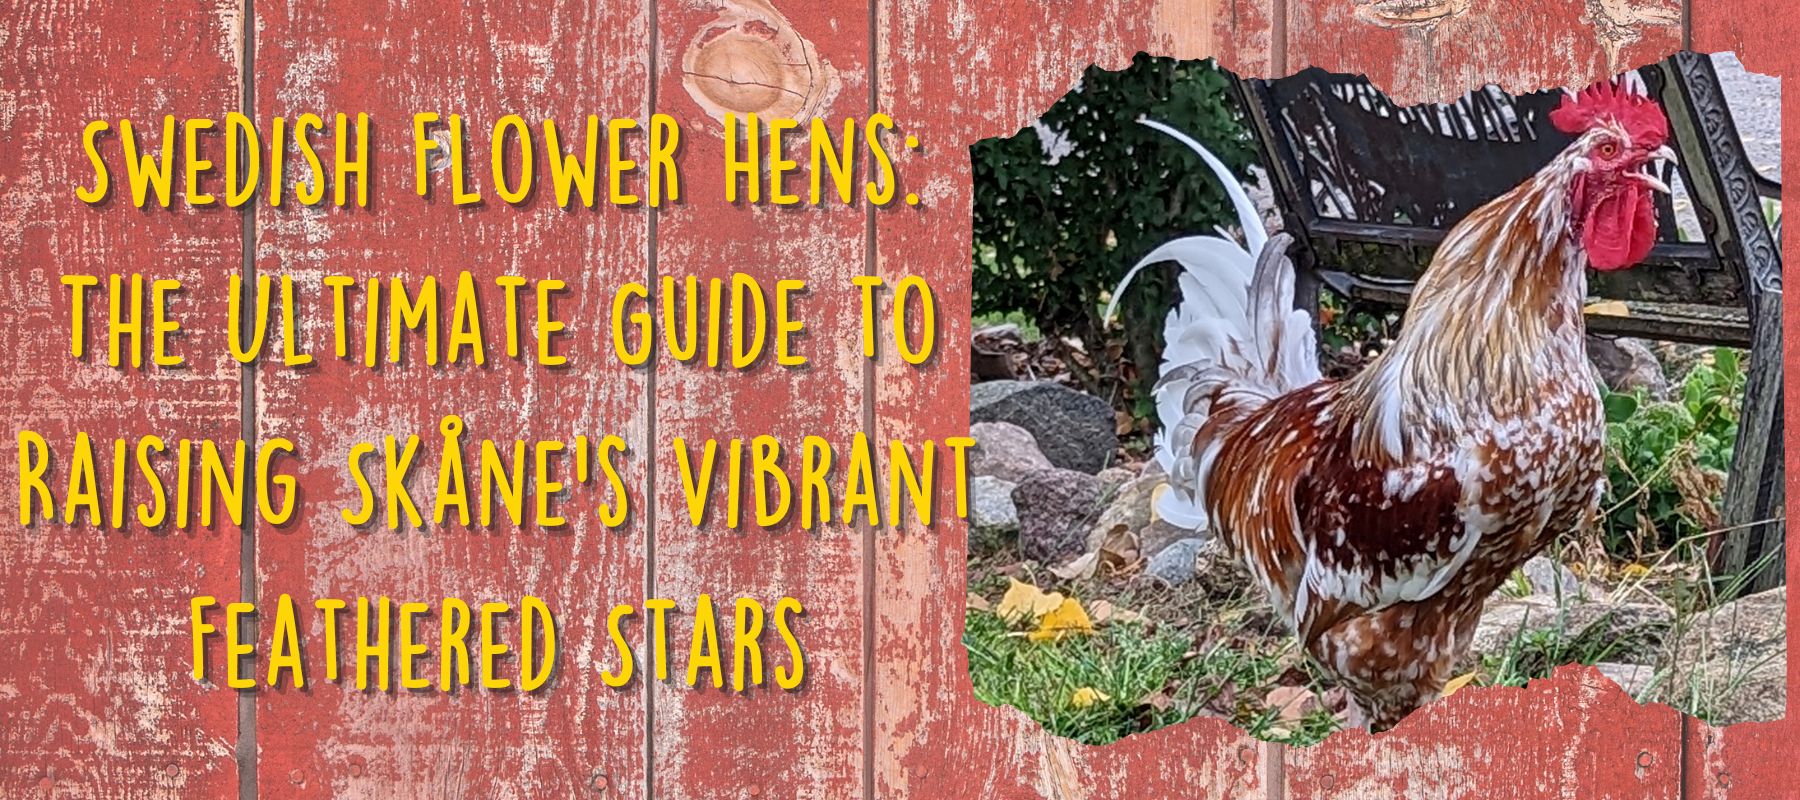 Swedish Flower Hens: The Ultimate Guide to Raising Skåne's Vibrant Feathered Stars